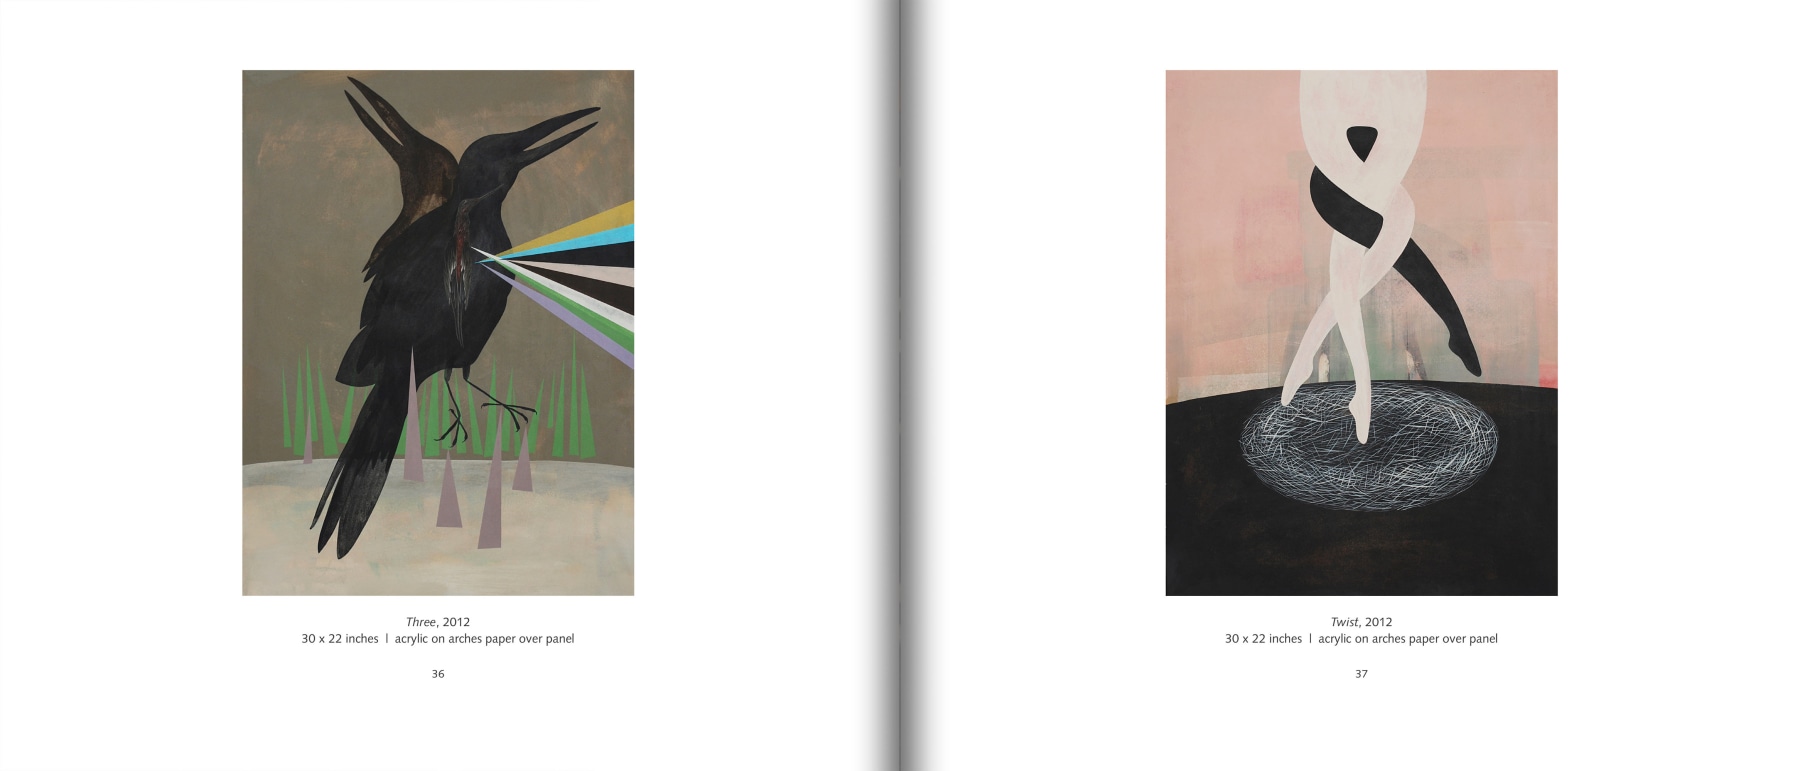 Pages 36 and 37 of JUST BETWEEN US: Wesley Anderegg, Rafael Perea de la Cabada, and Maria Rendon with &quot;Three&quot;, 2012 and &quot;Twist&quot;, 2012 by Maria Rendon